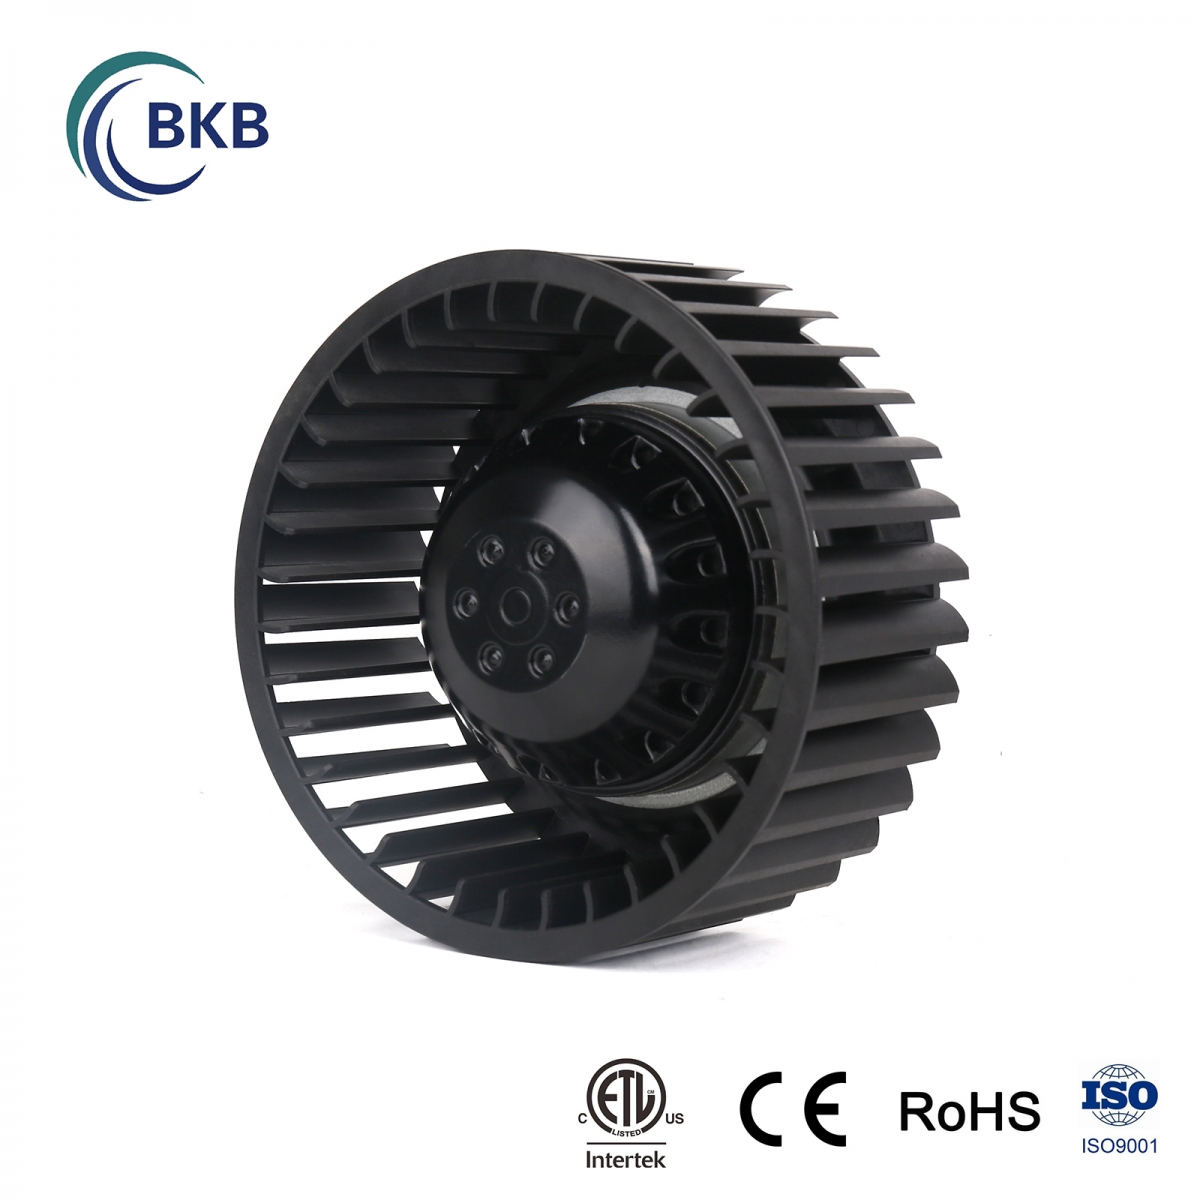 Plastic forward curved centrifugal fan φ 160mmH70 supplied by Manufacturer in China.-SUNLIGHT BLOWER,Centrifugal Fans, Inline Fans,Motors,Backward curved centrifugal fans ,Forward curved centrifugal fans ,inlet fans, EC fans